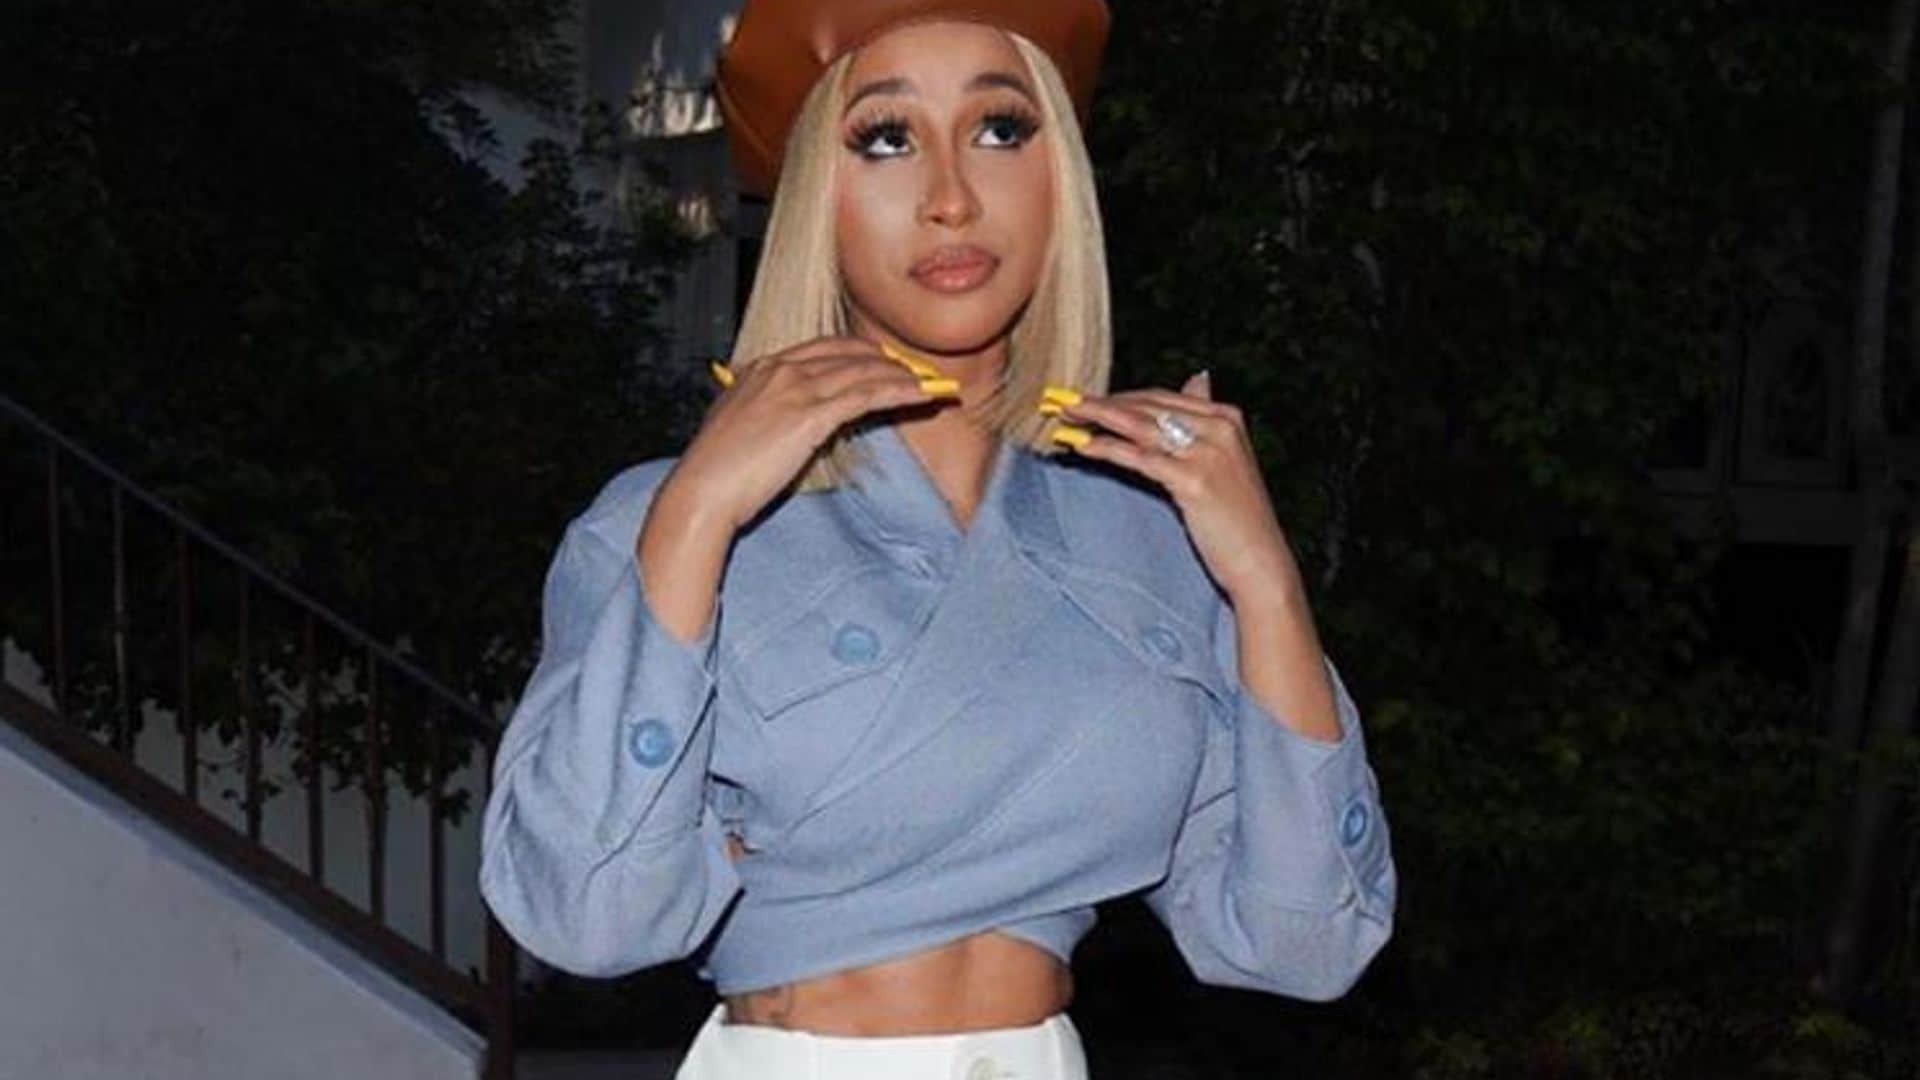 Cardi B shows off incredible toned abs as she raps in crop top